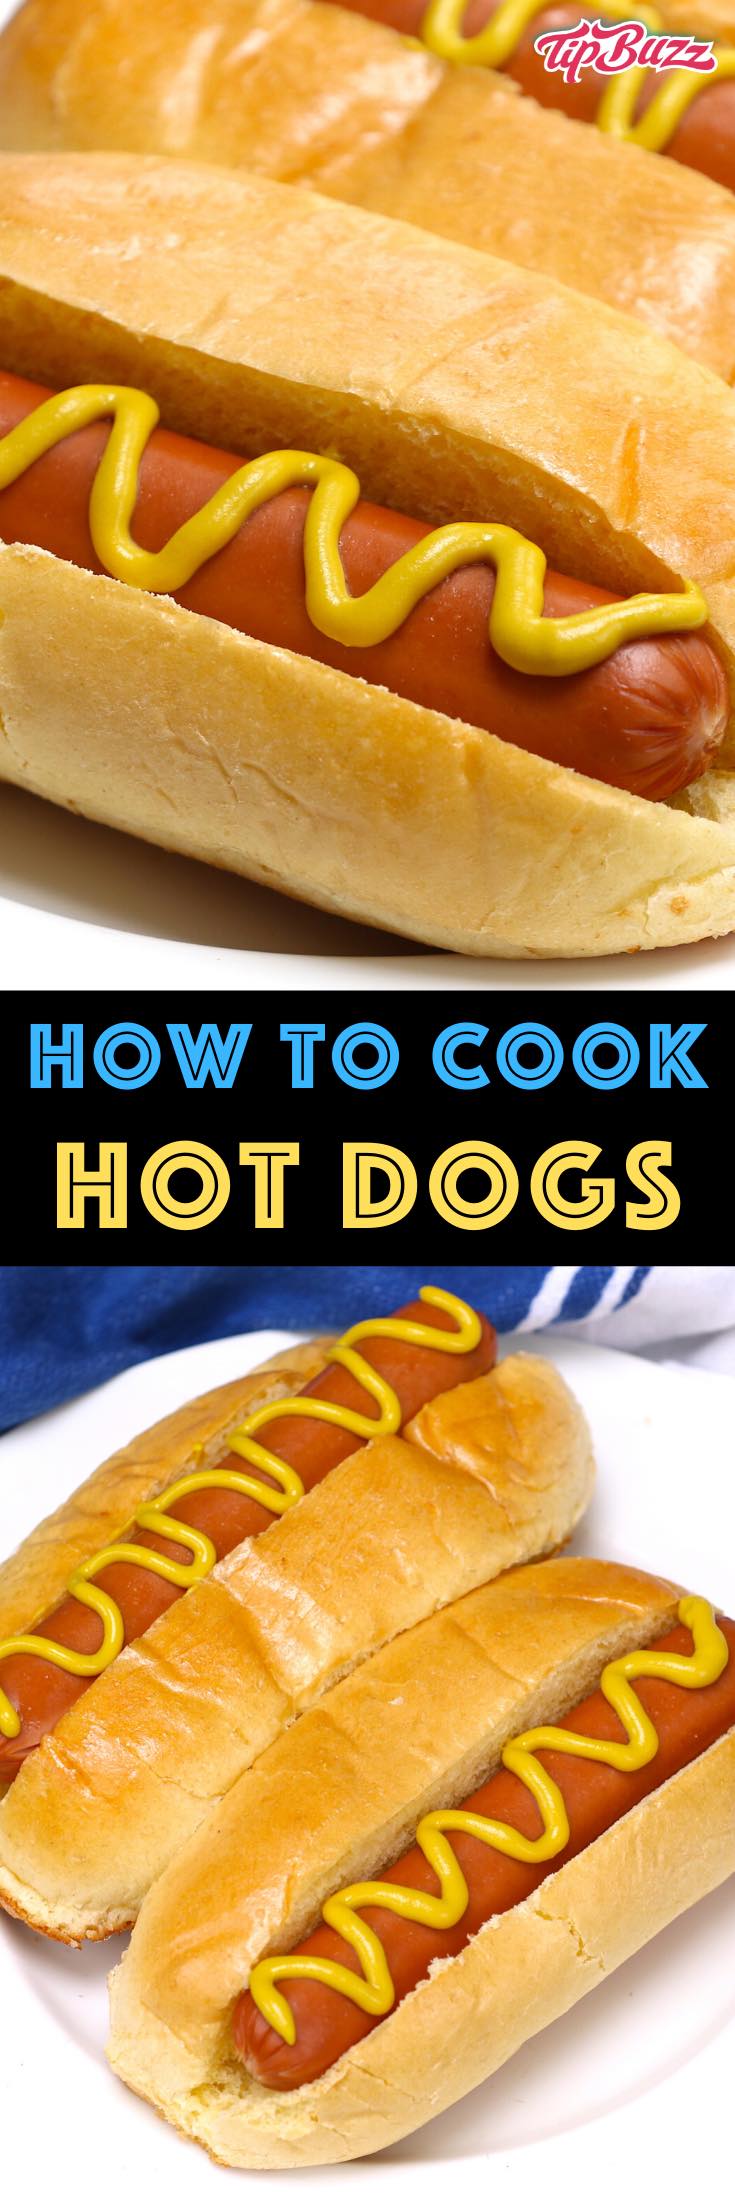 Learn How to Boil Hot Dogs and get a perfect wiener every time! We cover tips and tricks to know when they're done and special methods such as boiling in beer and boiling from frozen. Easy and delicious! #hotdogs #boilinghotdogs